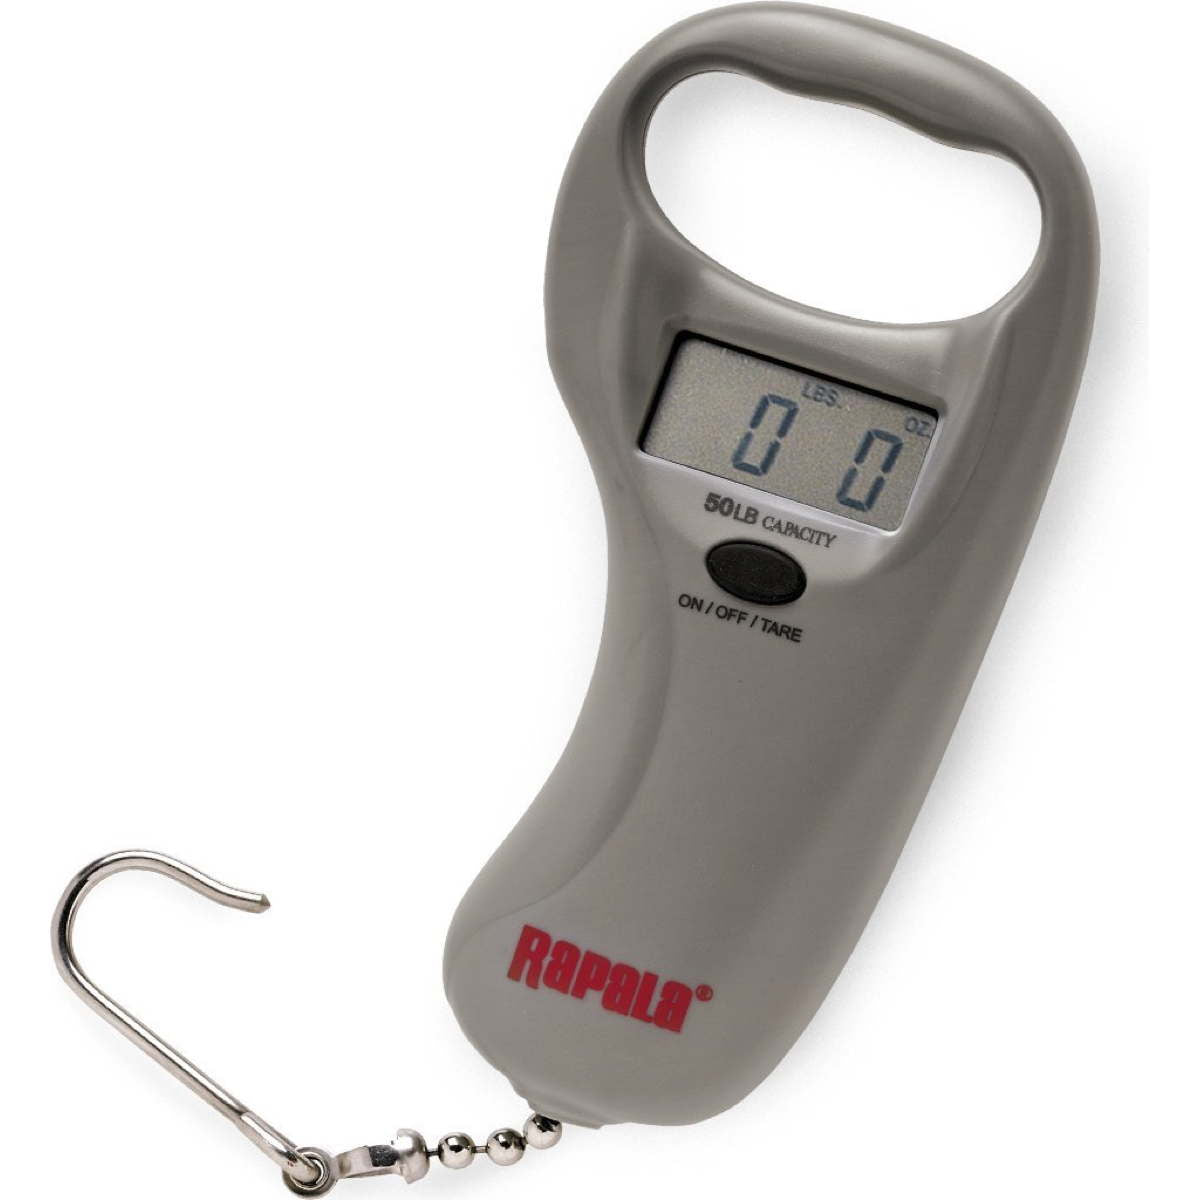 Photo of Rapala Sportsman's 50 Pound Digital Scale for sale at United Tackle Shops.